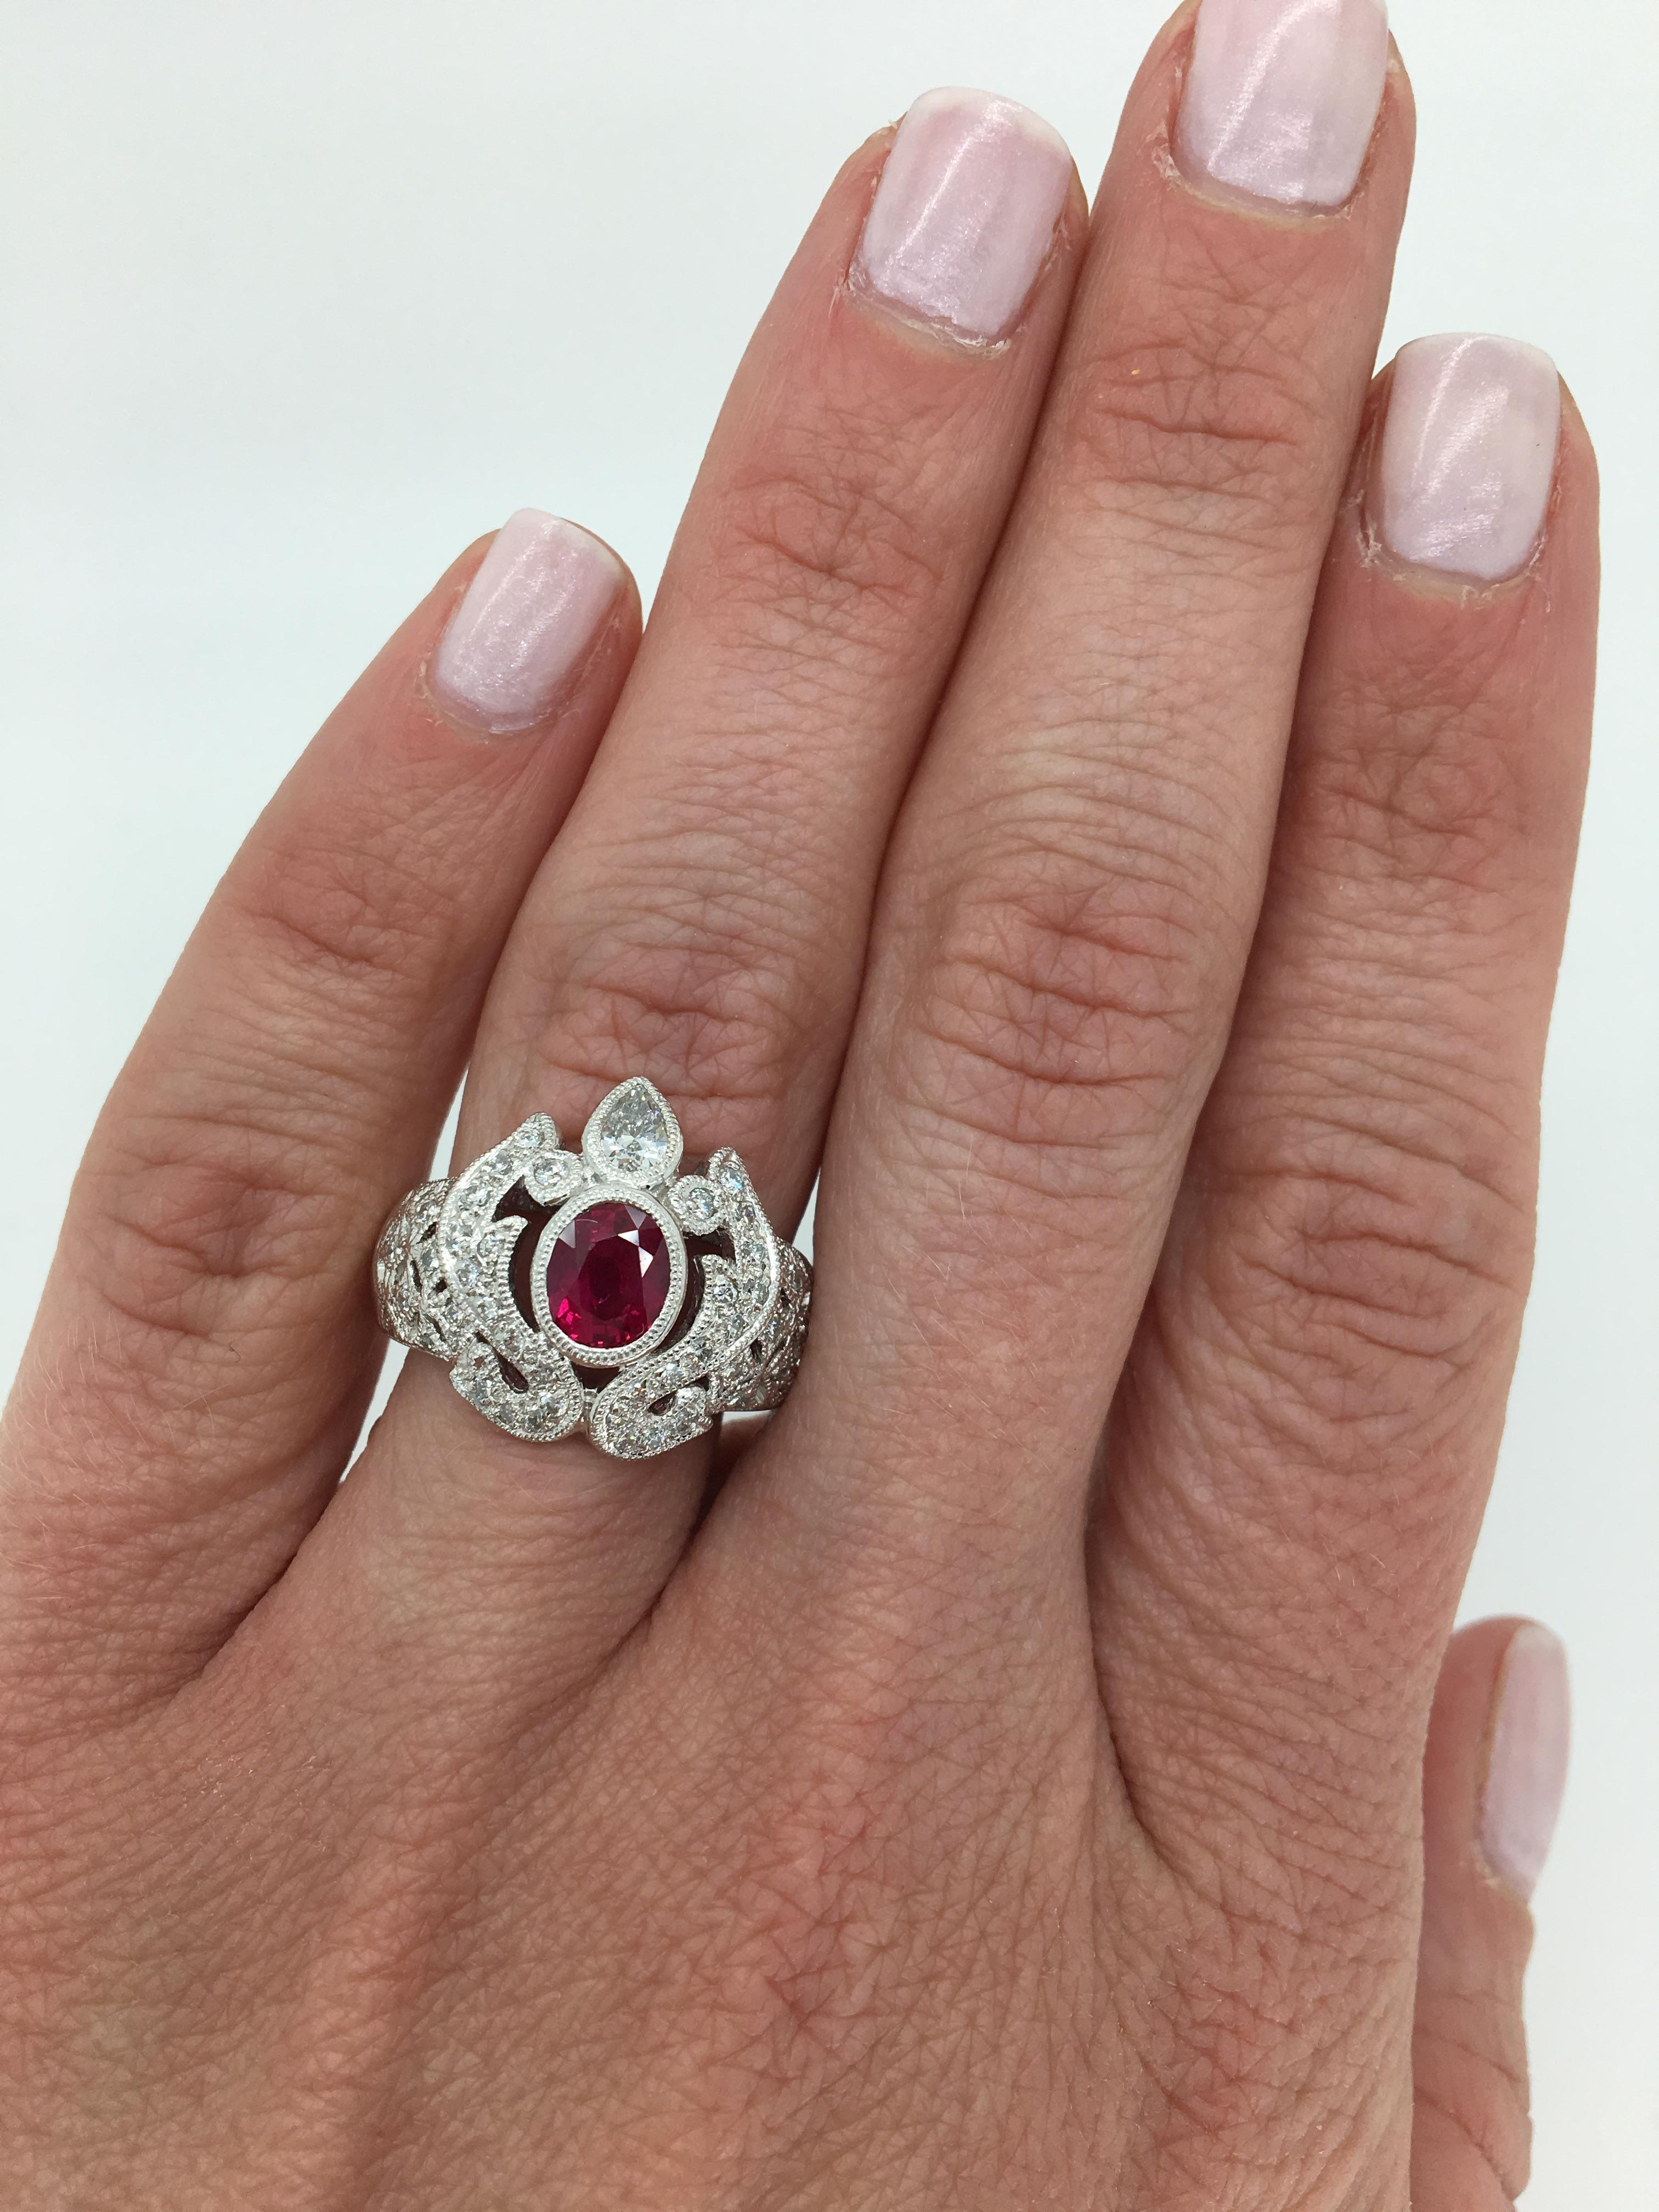 Unique vintage inspired Ruby and Diamond ring crafted in platinum.

Gemstone: Ruby & Diamond
Gemstone Carat Weight: Approximately .92CT Oval Cut Ruby
Diamond Carat Weight: Approximately .86CTW
Diamond Cut: Round Brilliant 
Color: Average